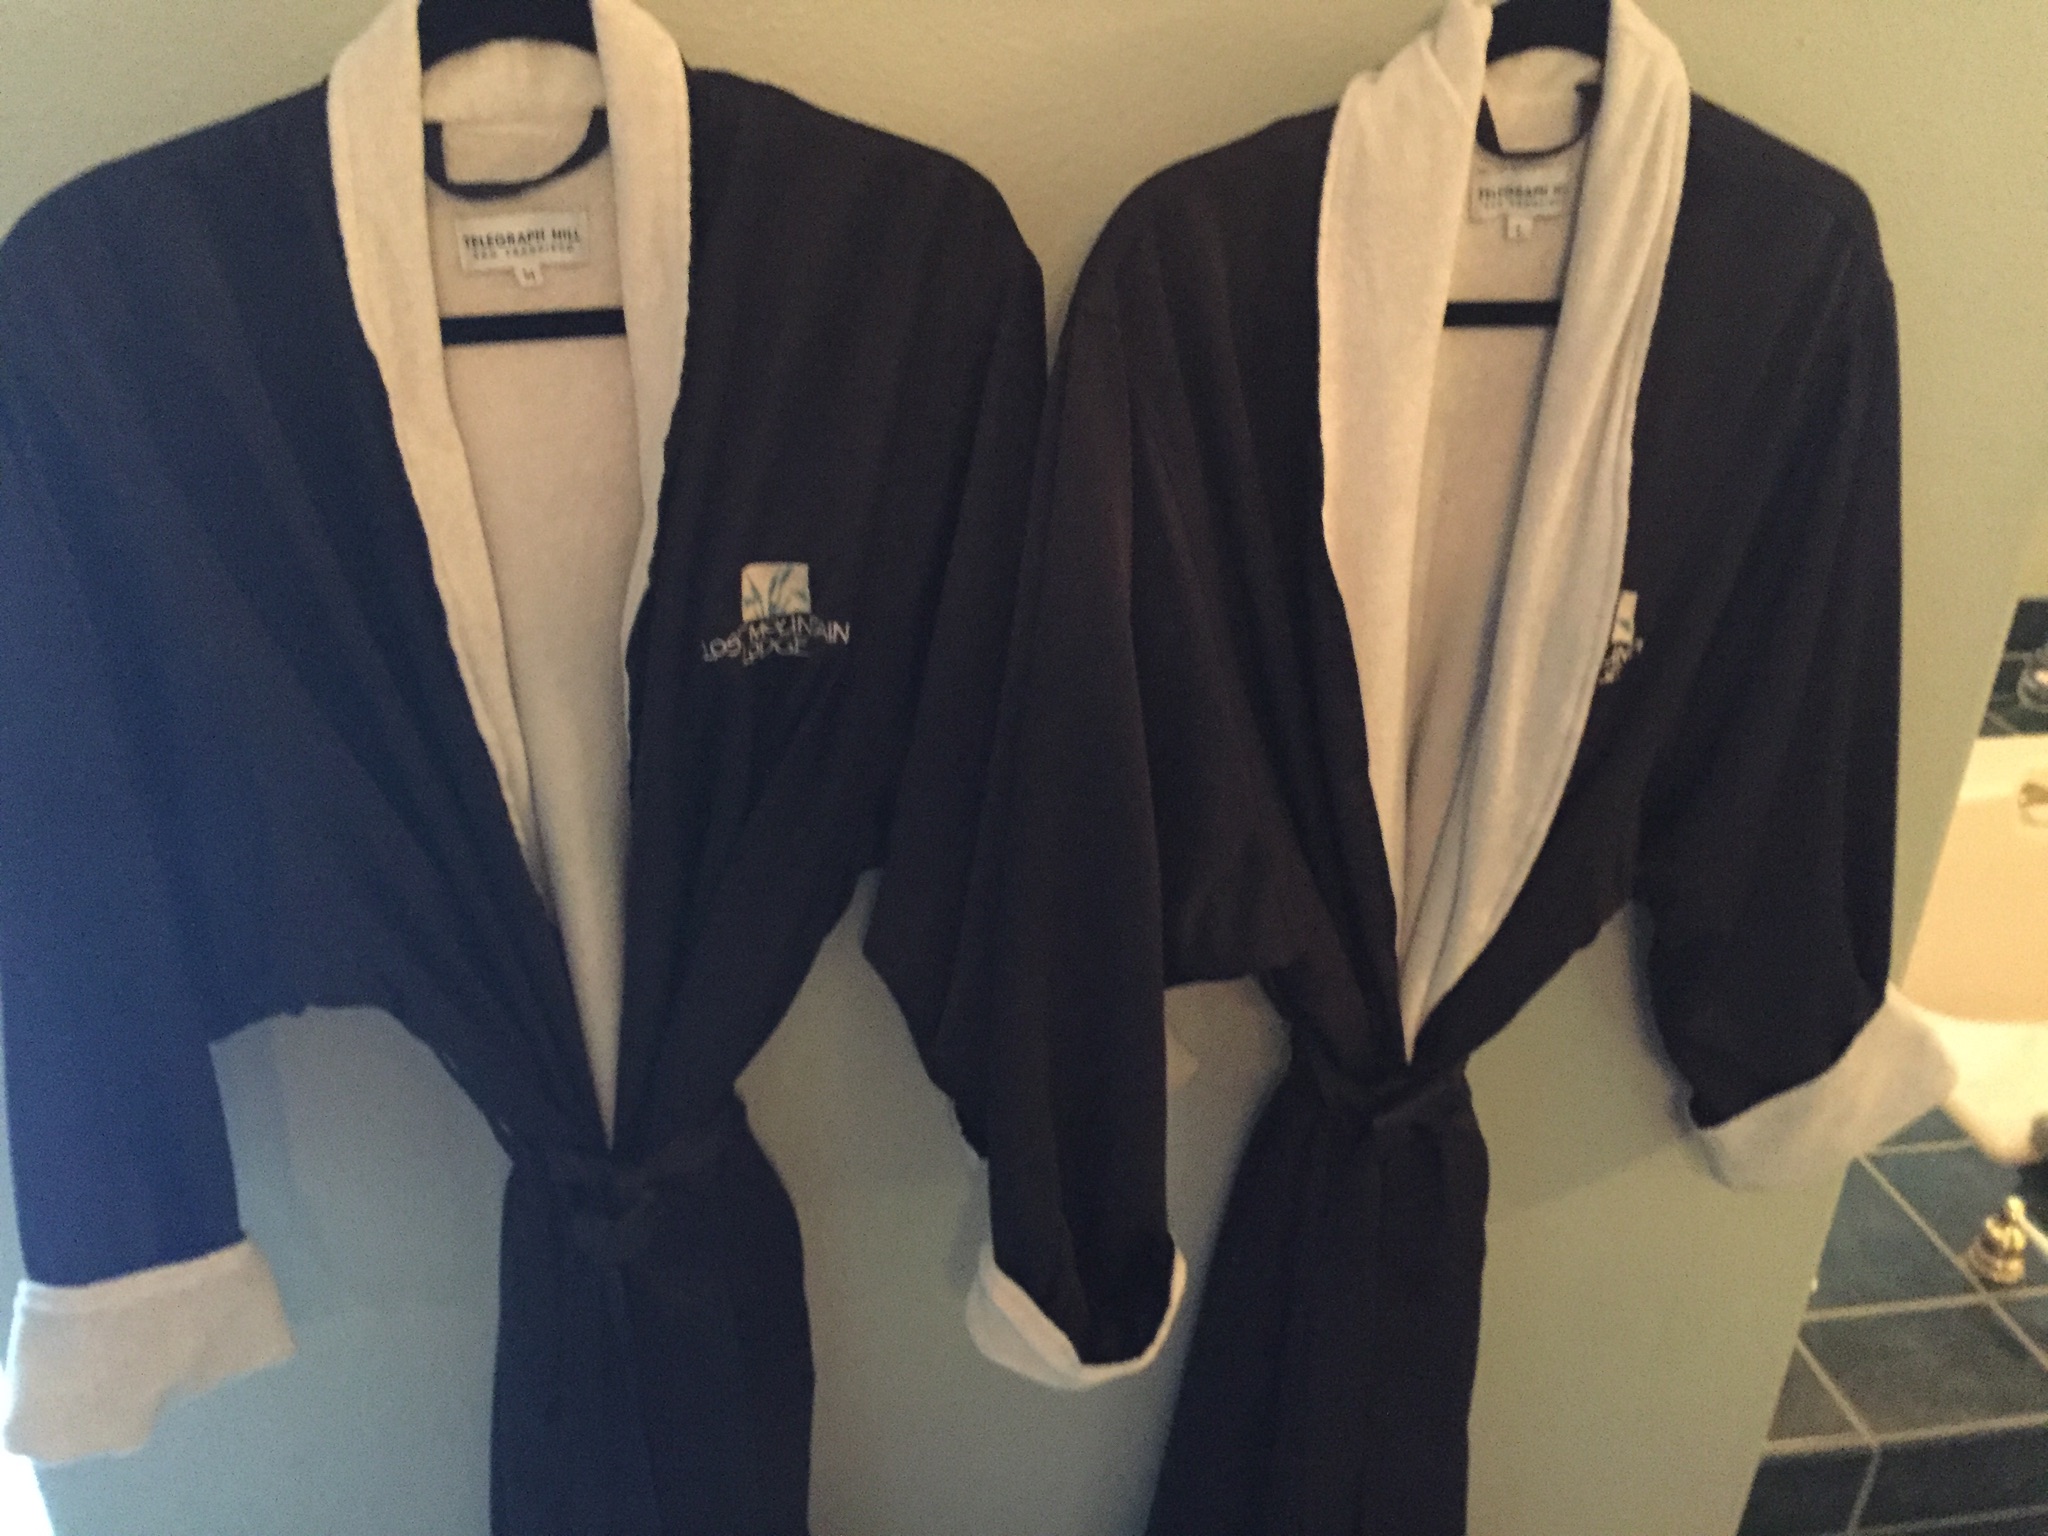 Lost Mountain Lodge robes